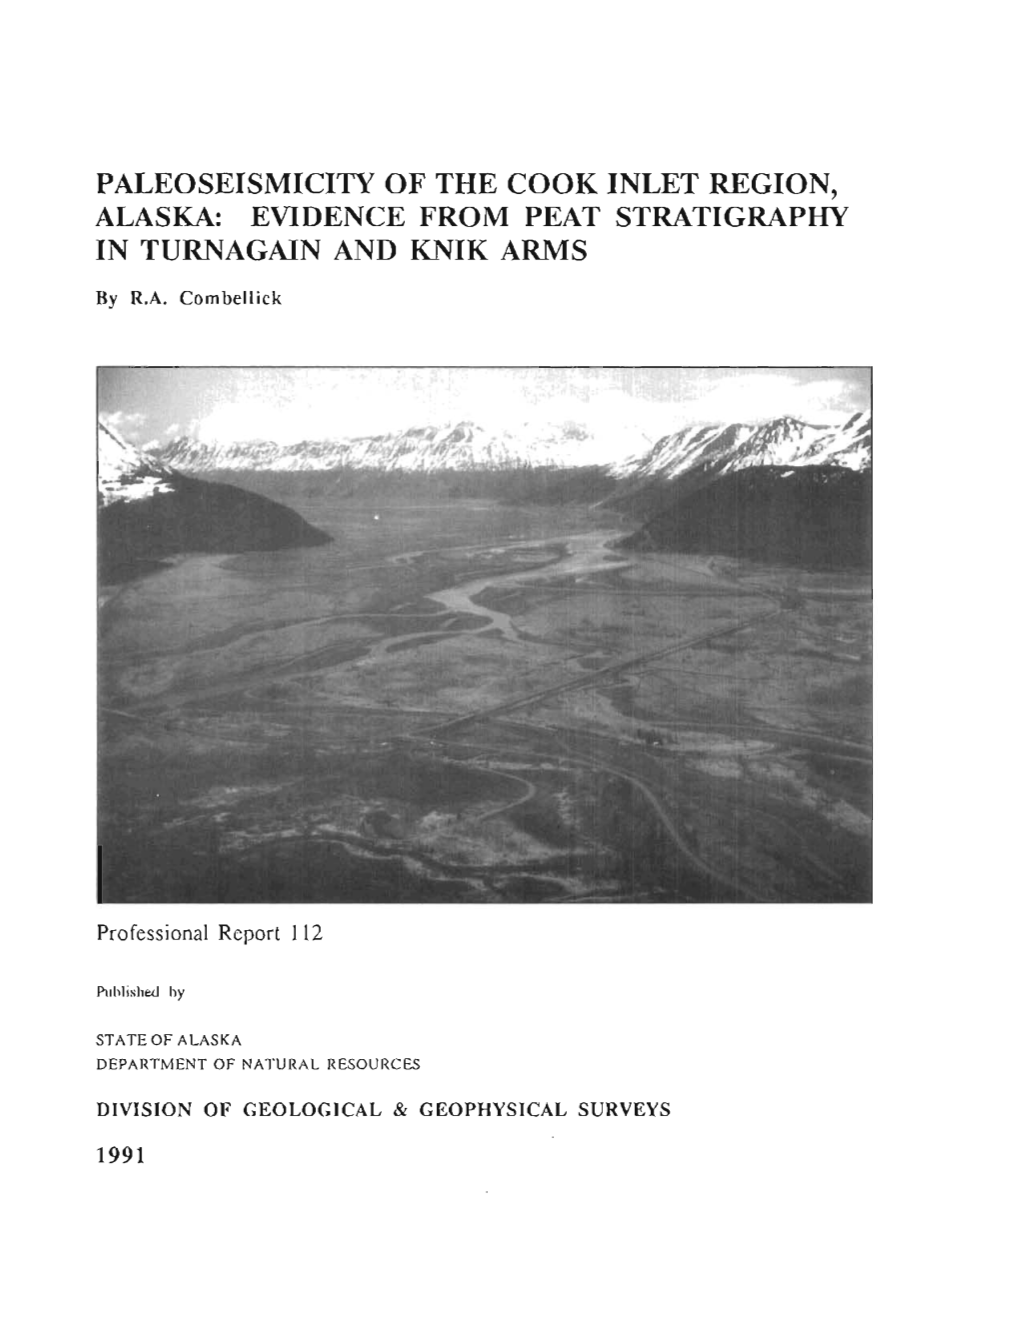 Evidence from Peat Stratigraphy in Turnagain and Knik Arms